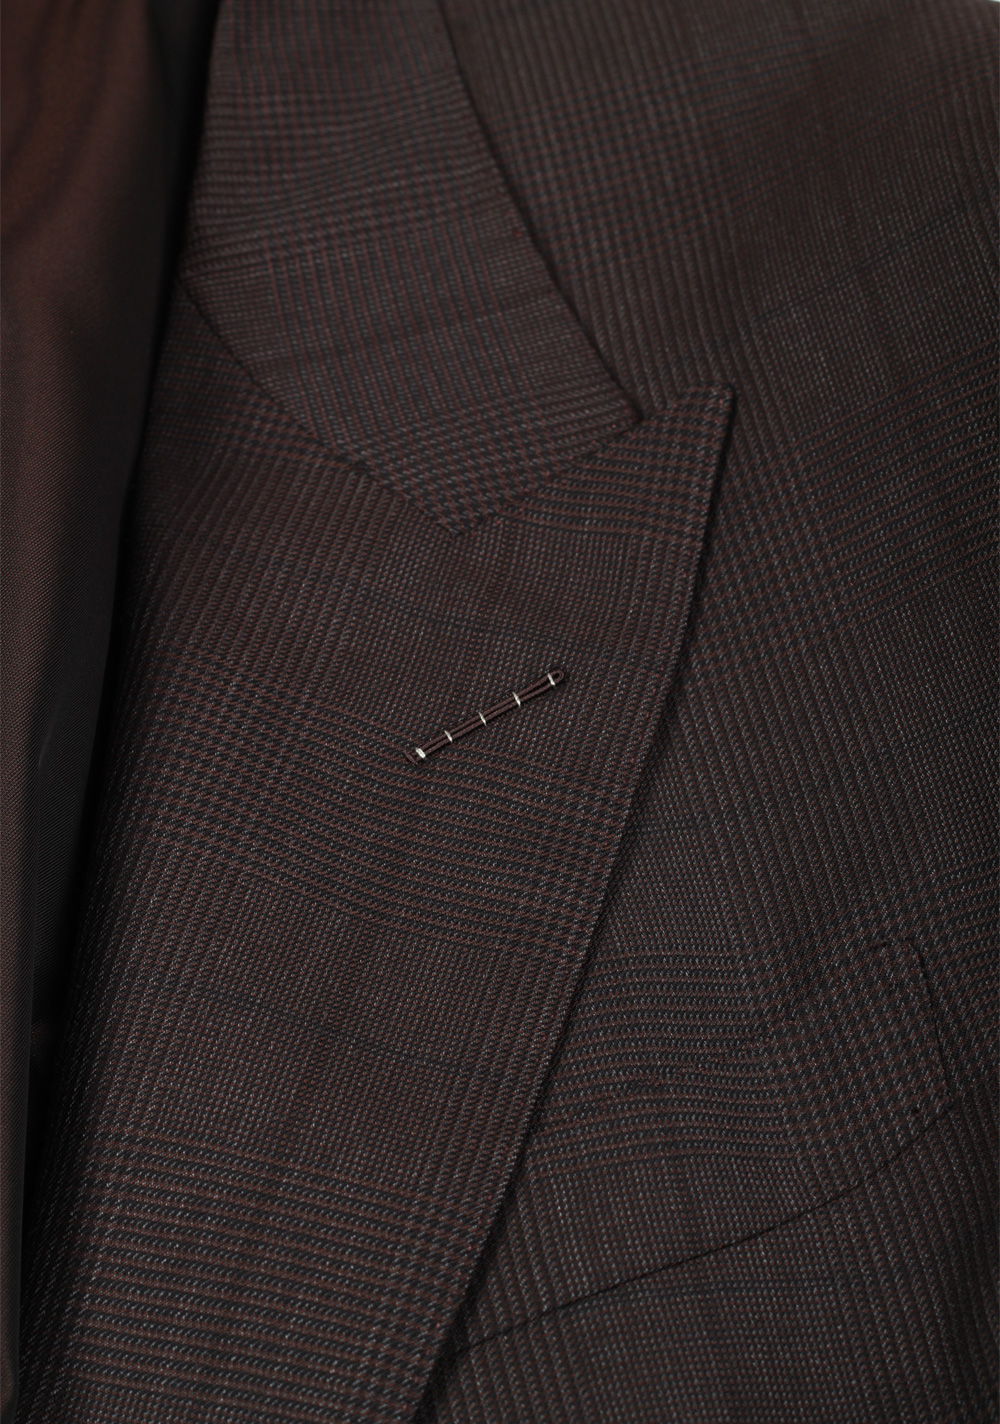 TOM FORD Shelton Checked Brown Suit | Costume Limité